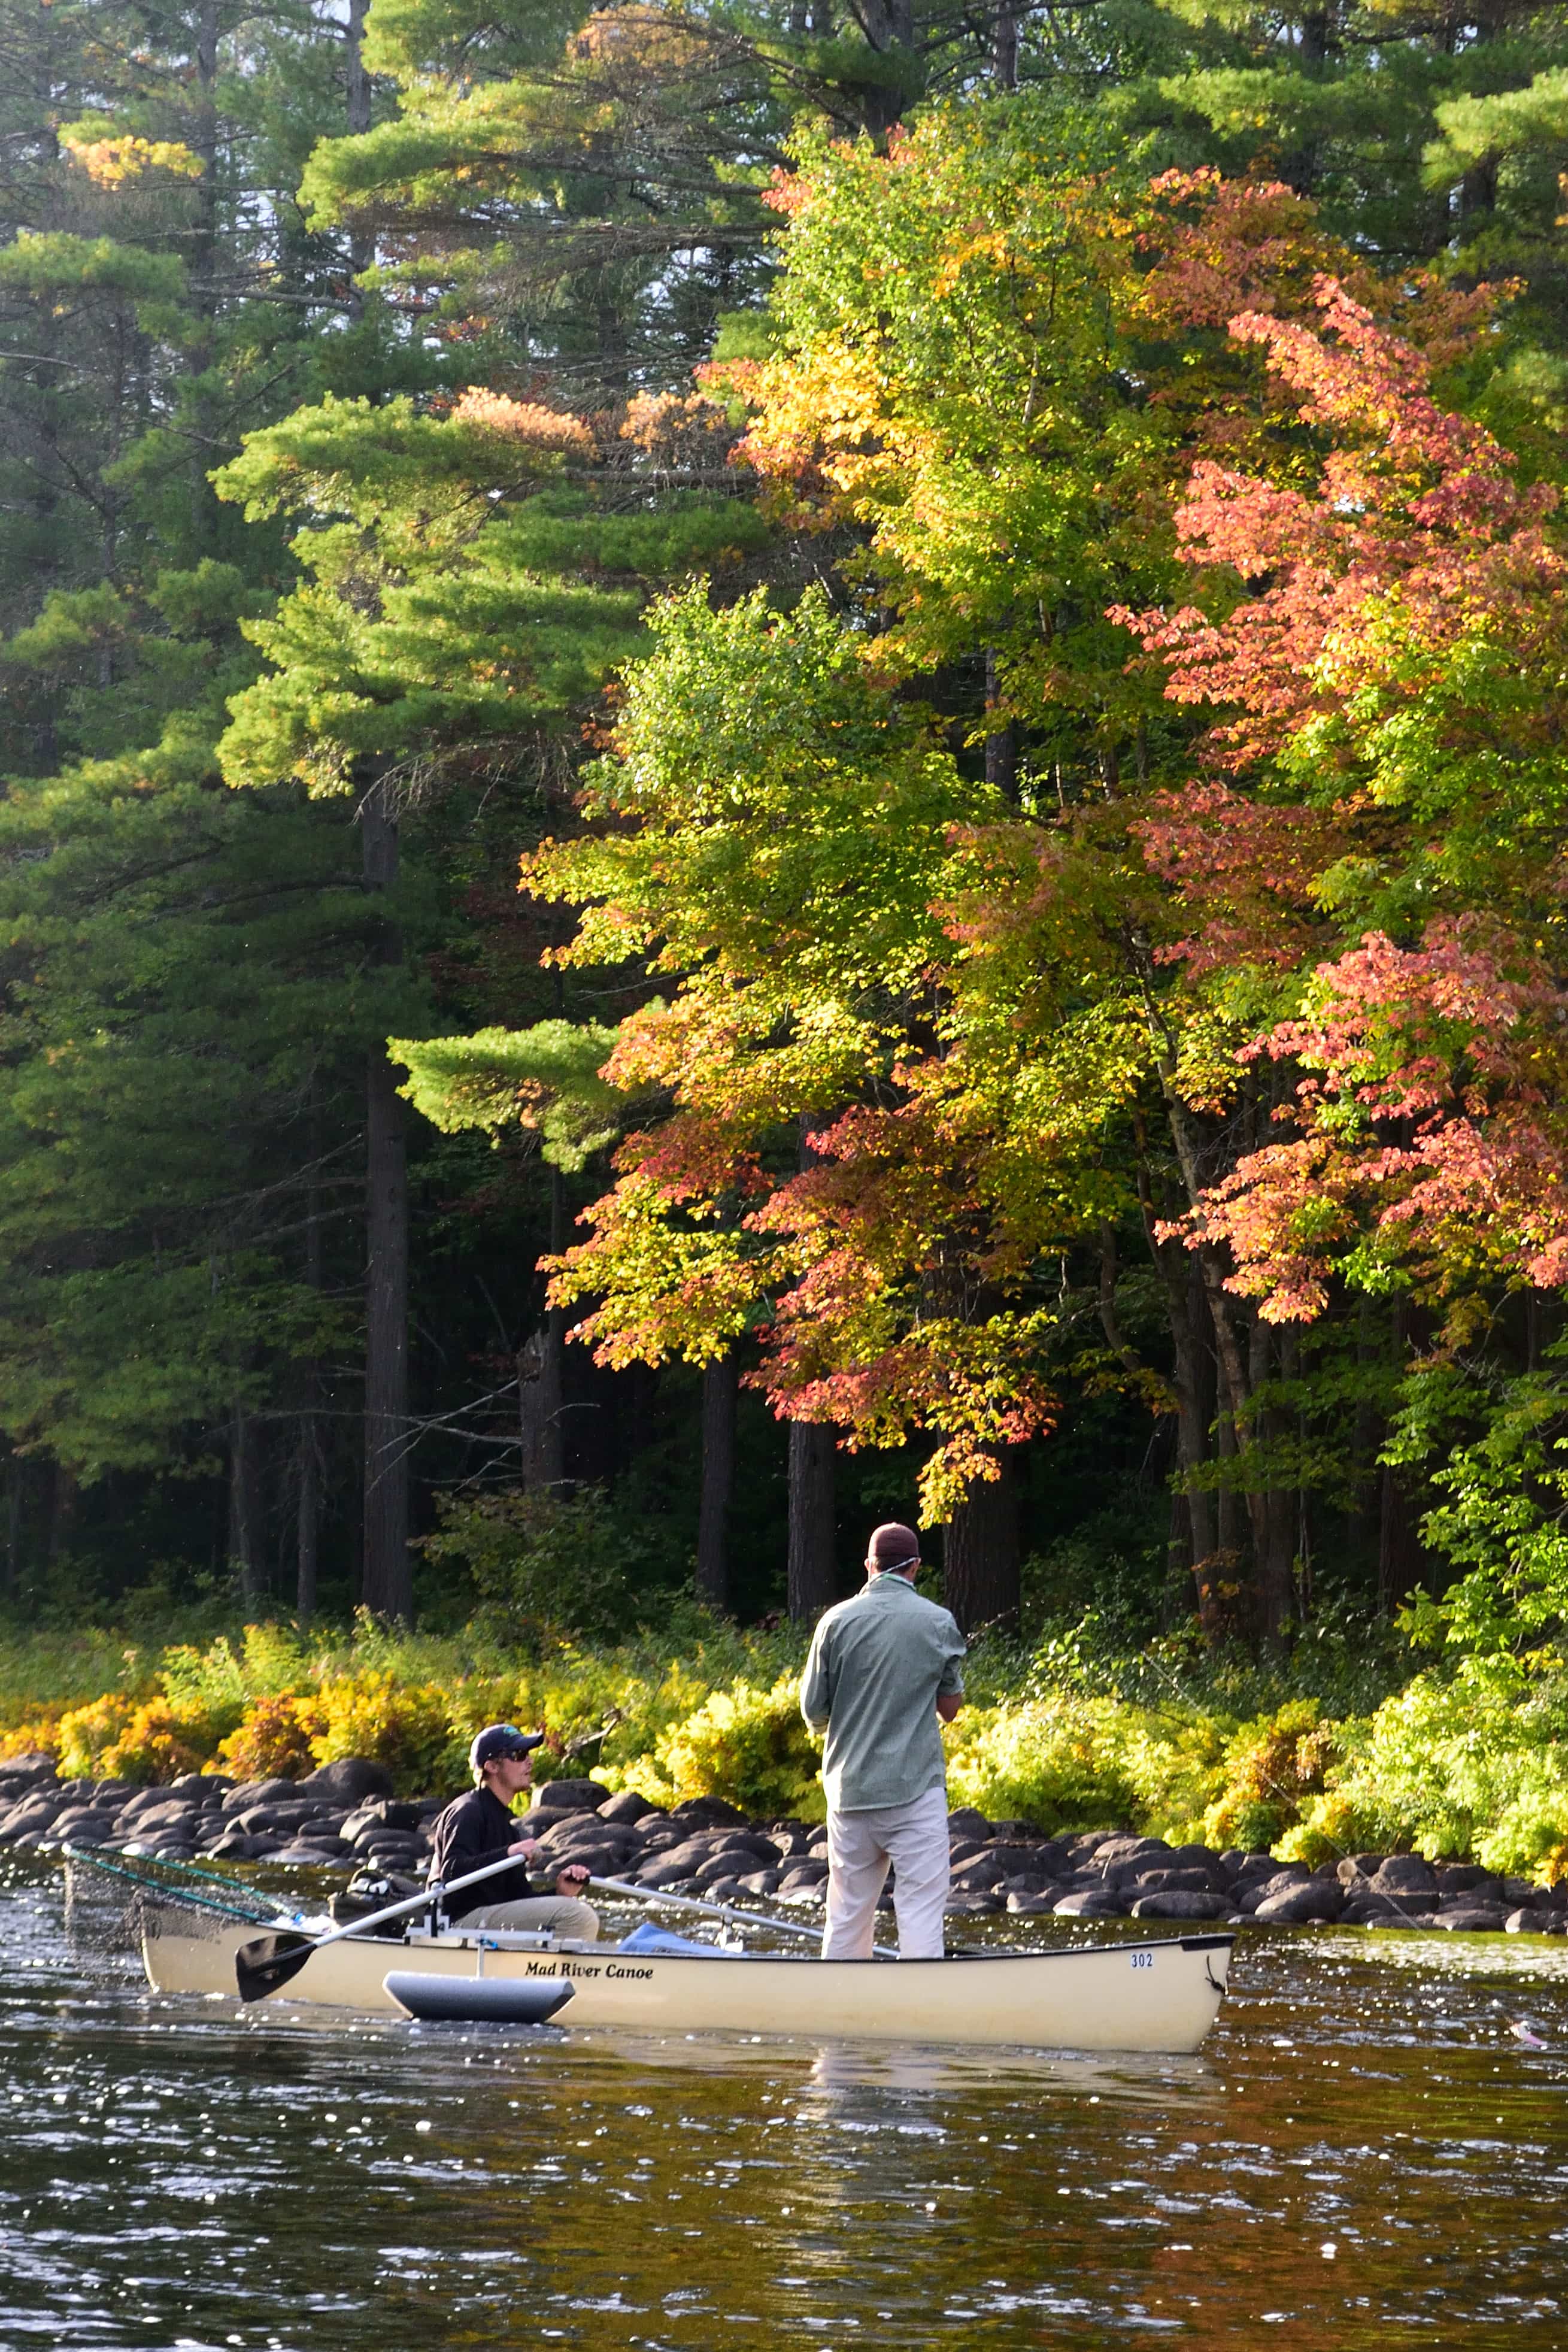 A little fall foliage as a backdrop to some epic fishing